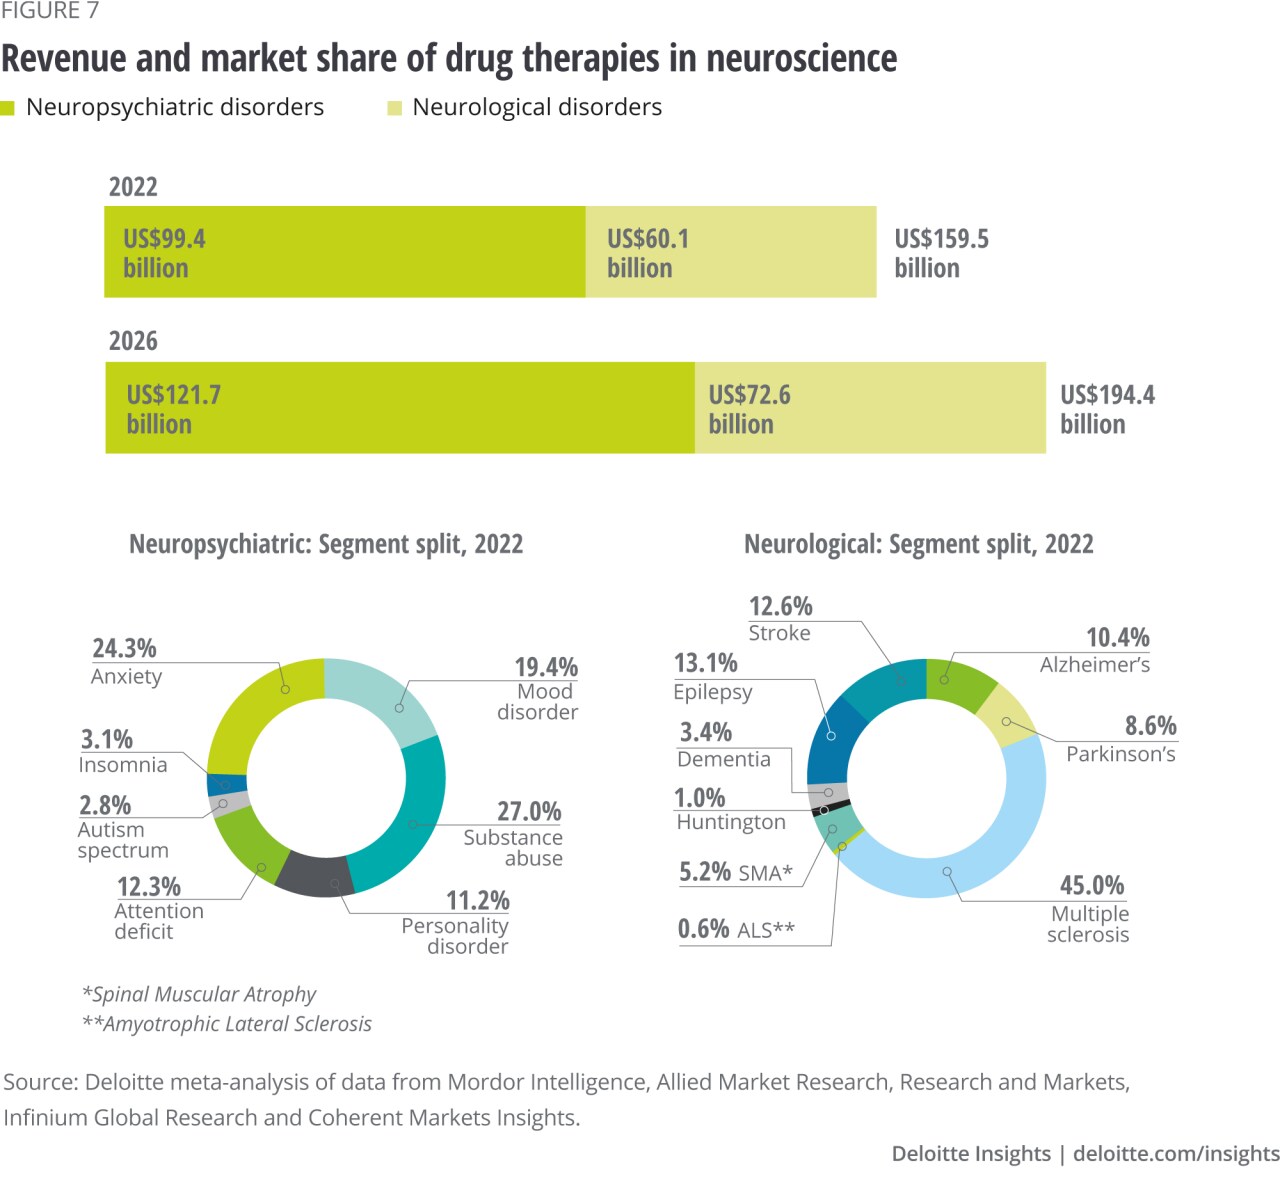 Figure 7. Revenue and market share of drug therapies in neuroscience